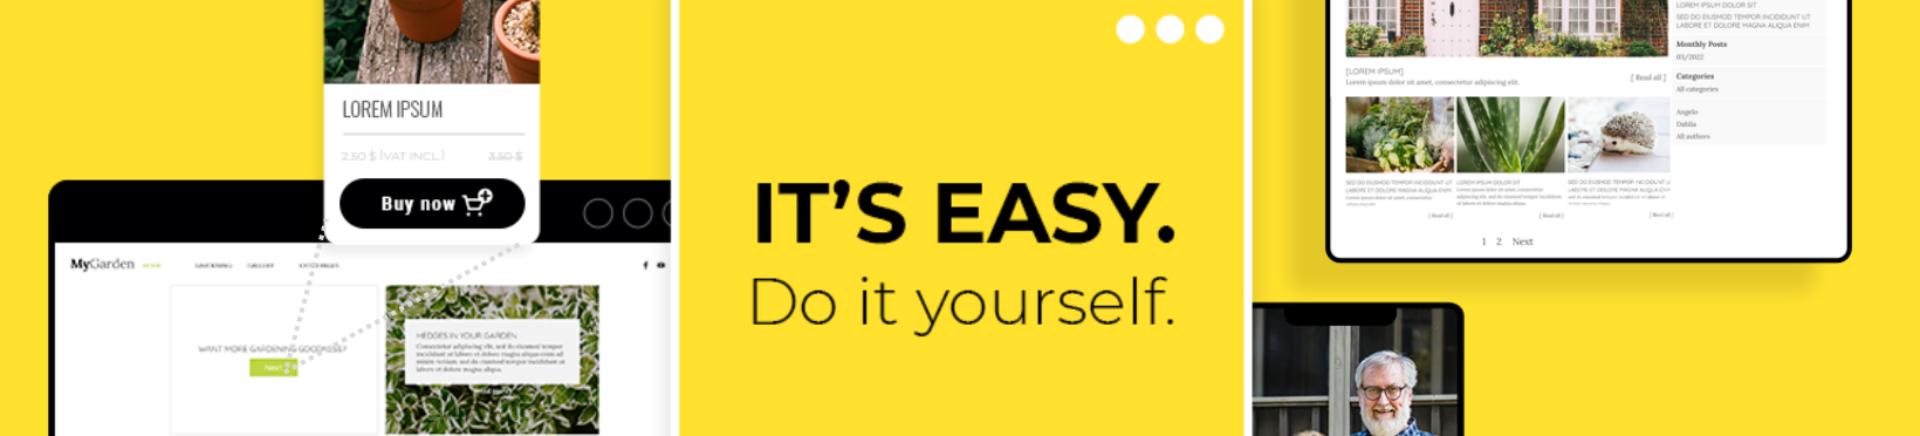 It's easy. Do it yourself. - Incomedia